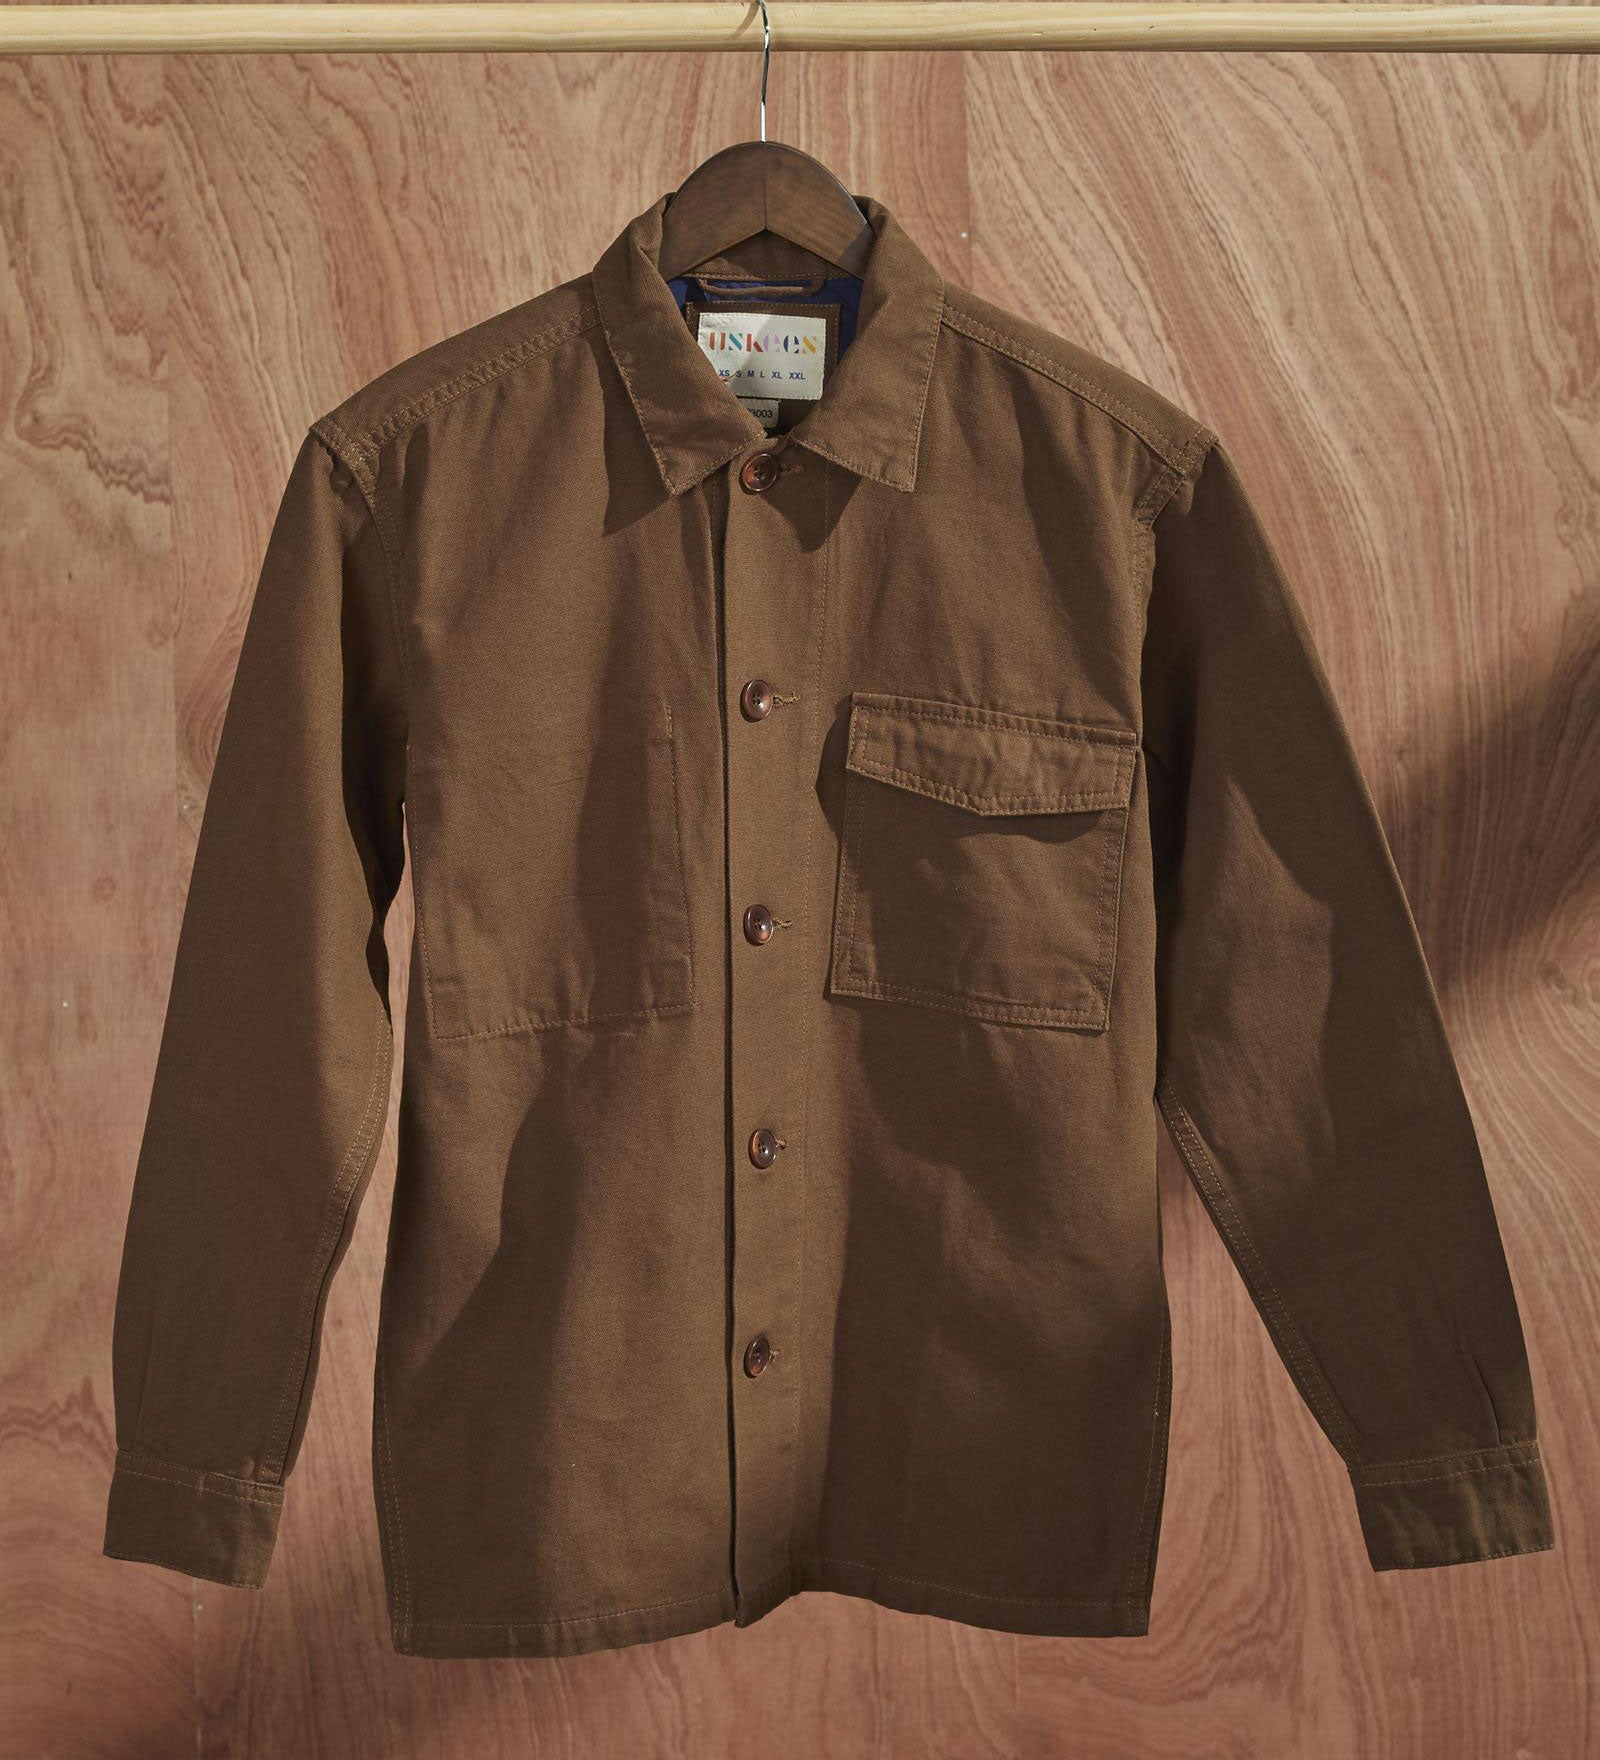 Front view of brown coloured, buttoned workshirt from Uskees presented on hanger with wooden backdrop.